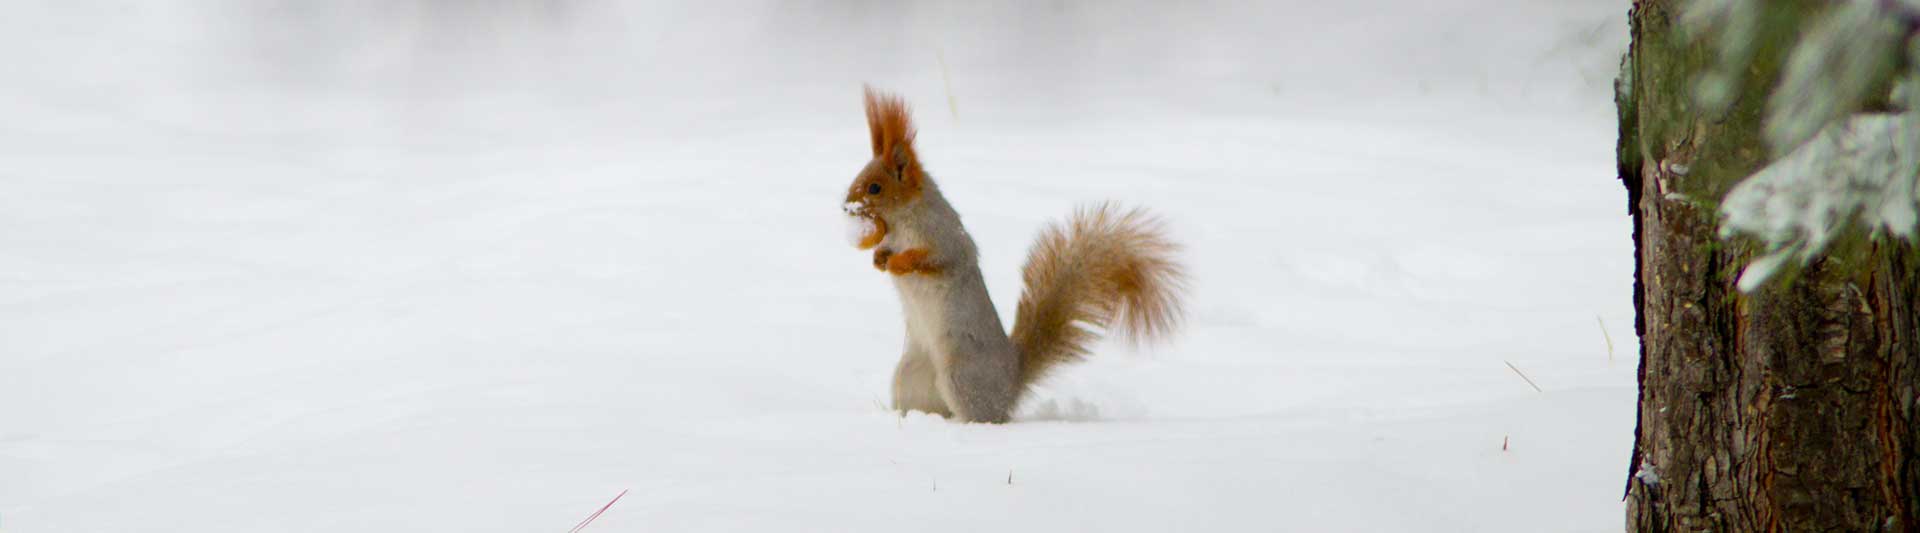 Do Squirrels Hibernate? And What Do They Get Up To In Winter?